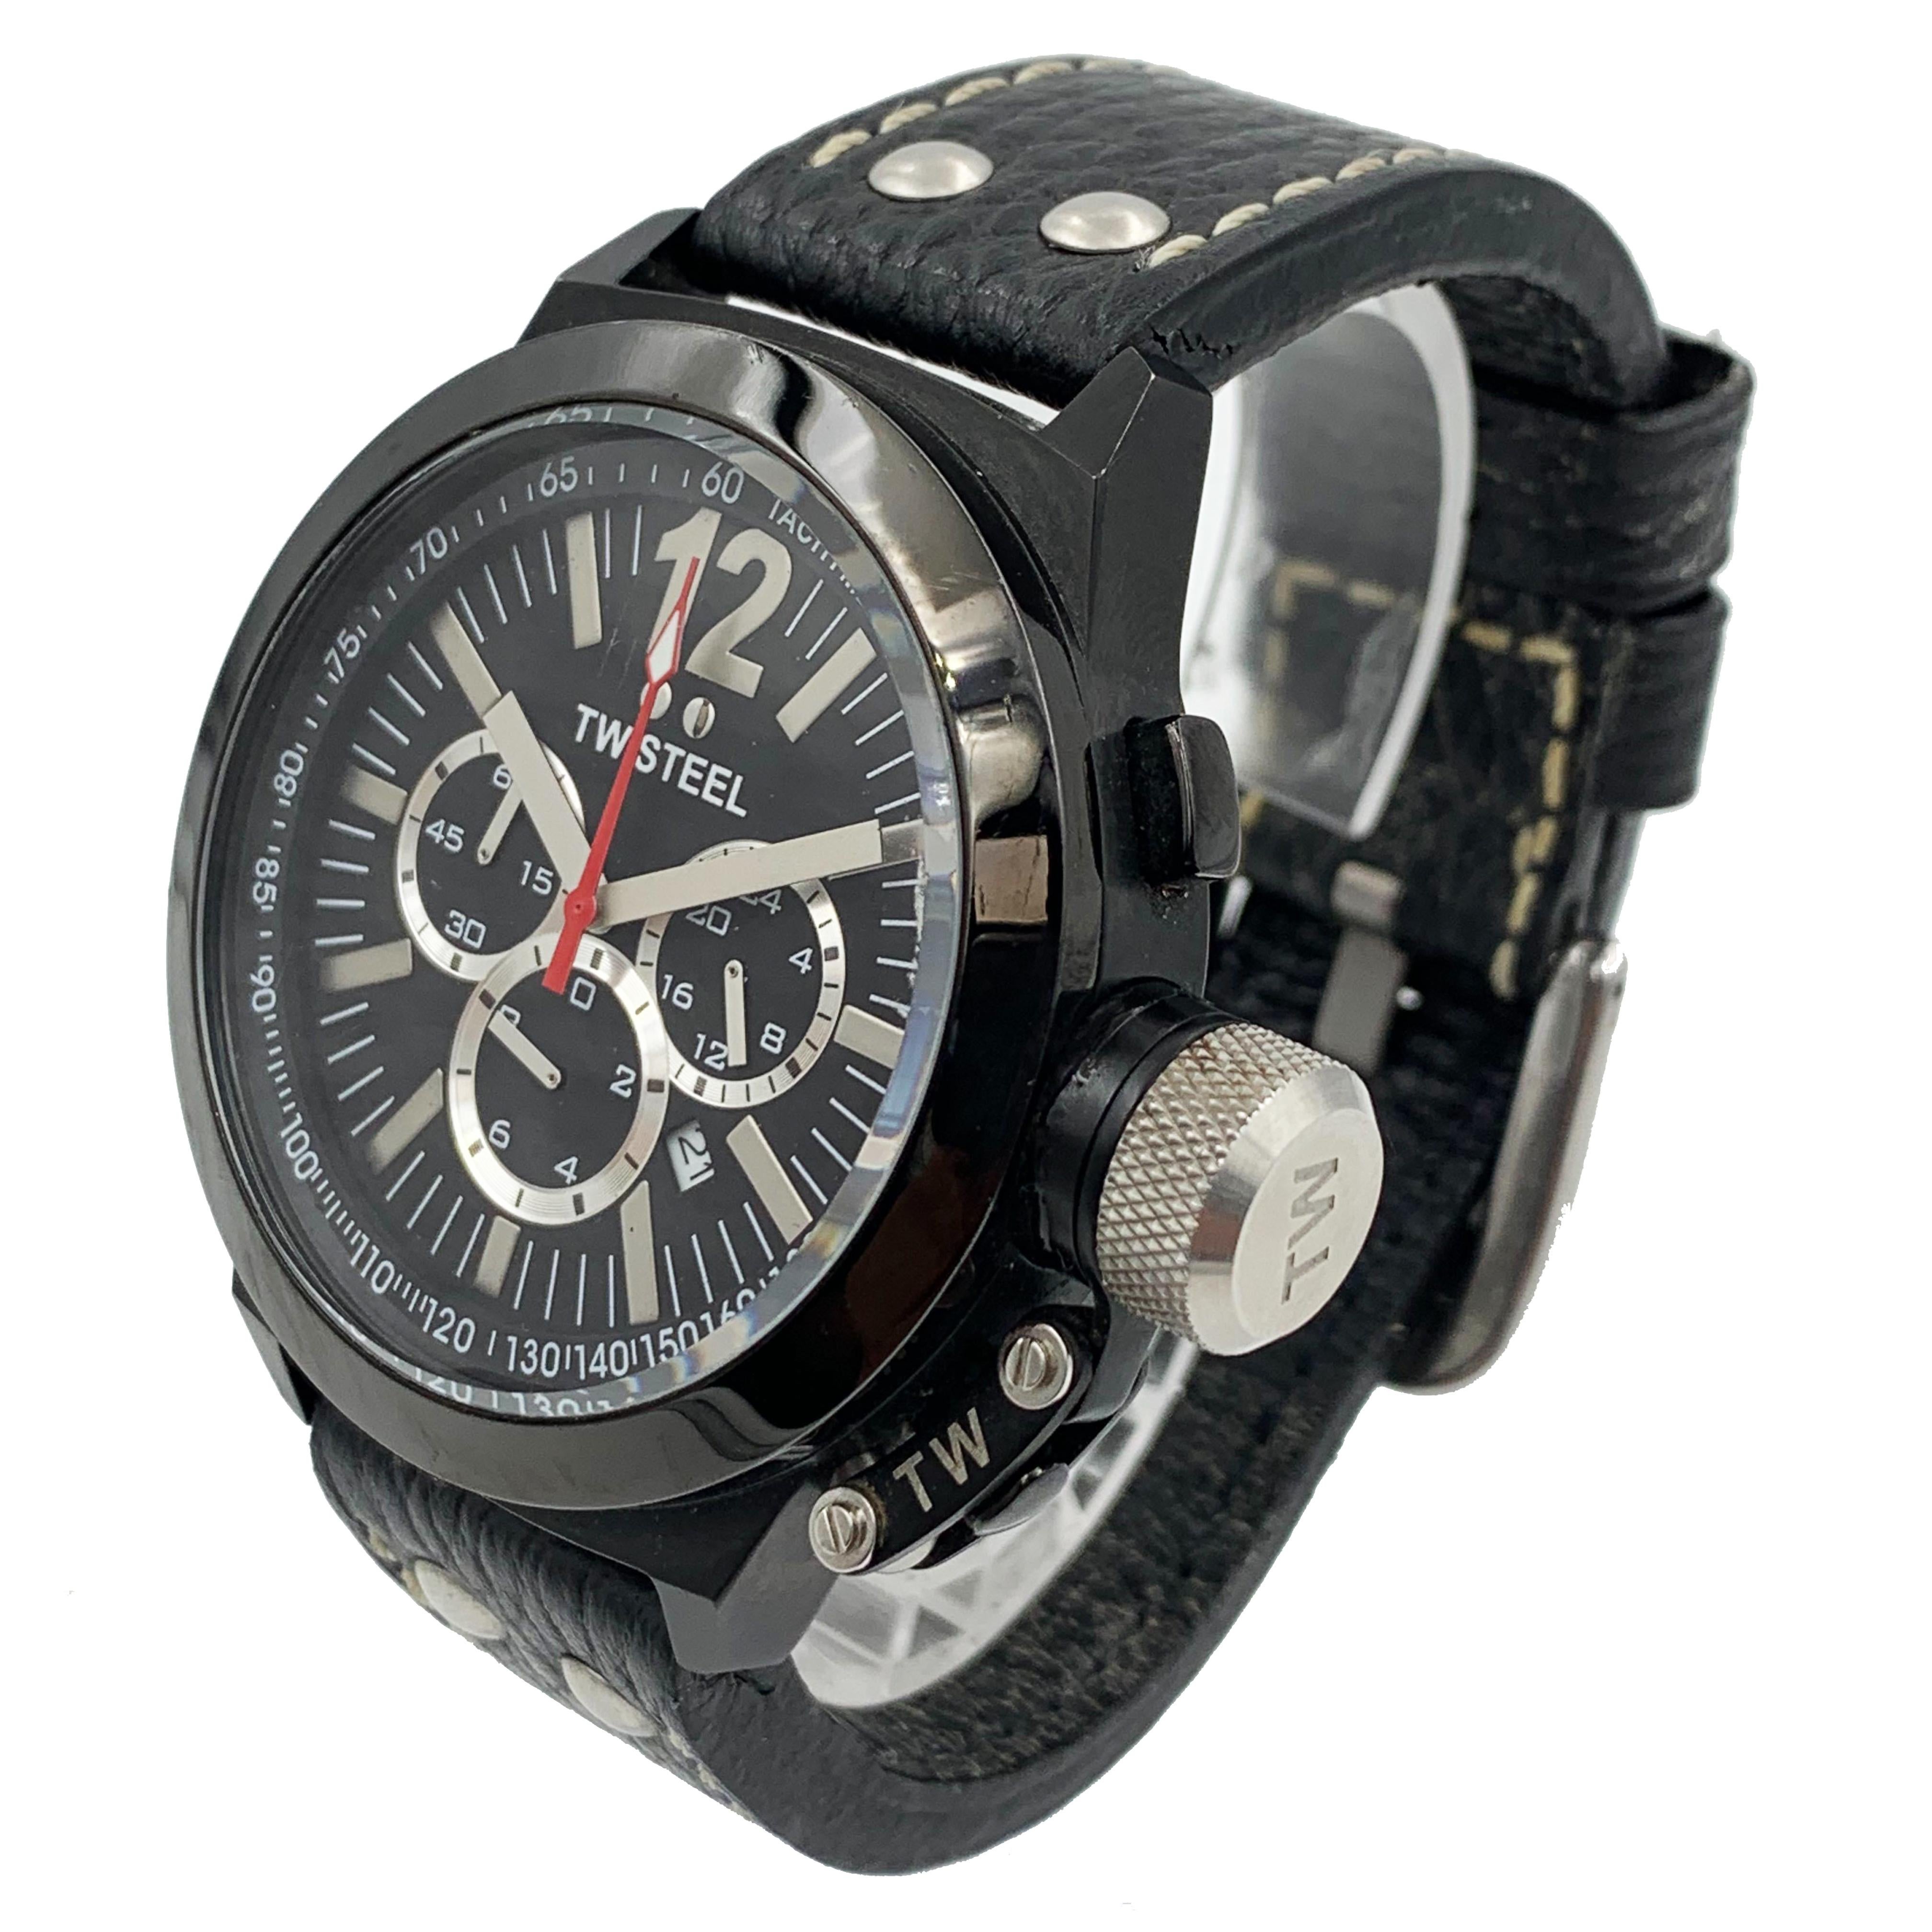 This is pre owned Watch. Watch has visible signs of wear. Minor Scratches on the case and bezel. Leather Band have visible signs of use as visible in pictures. Quartz movement Black chronograph dial Black coated steel case black leather band Mineral